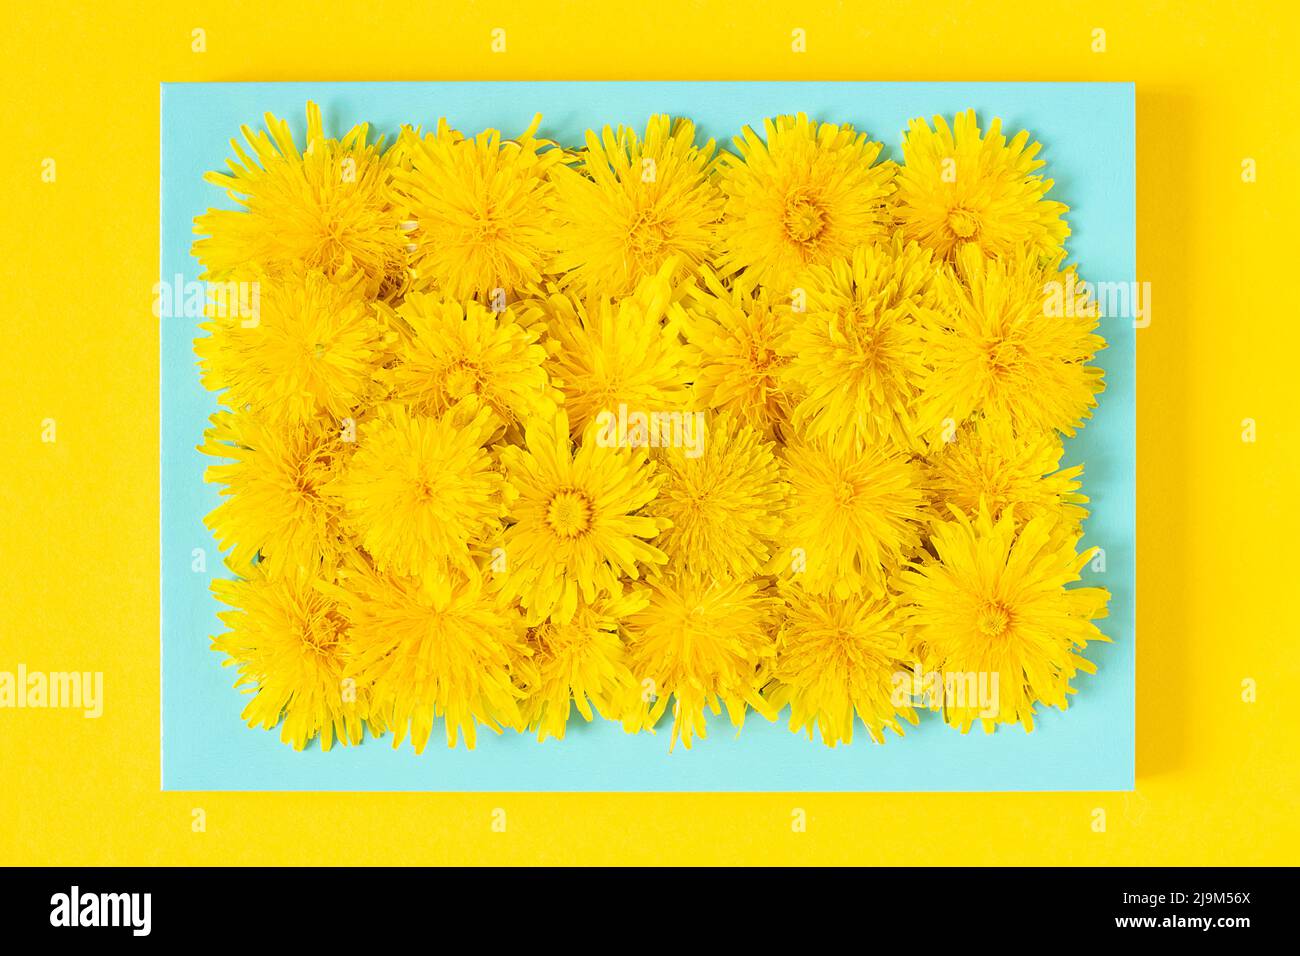 Summer picture. Blue frame with yellow dandelions flowers on yellow background. Creative summer time concept. Top view, Flat lay. Stock Photo